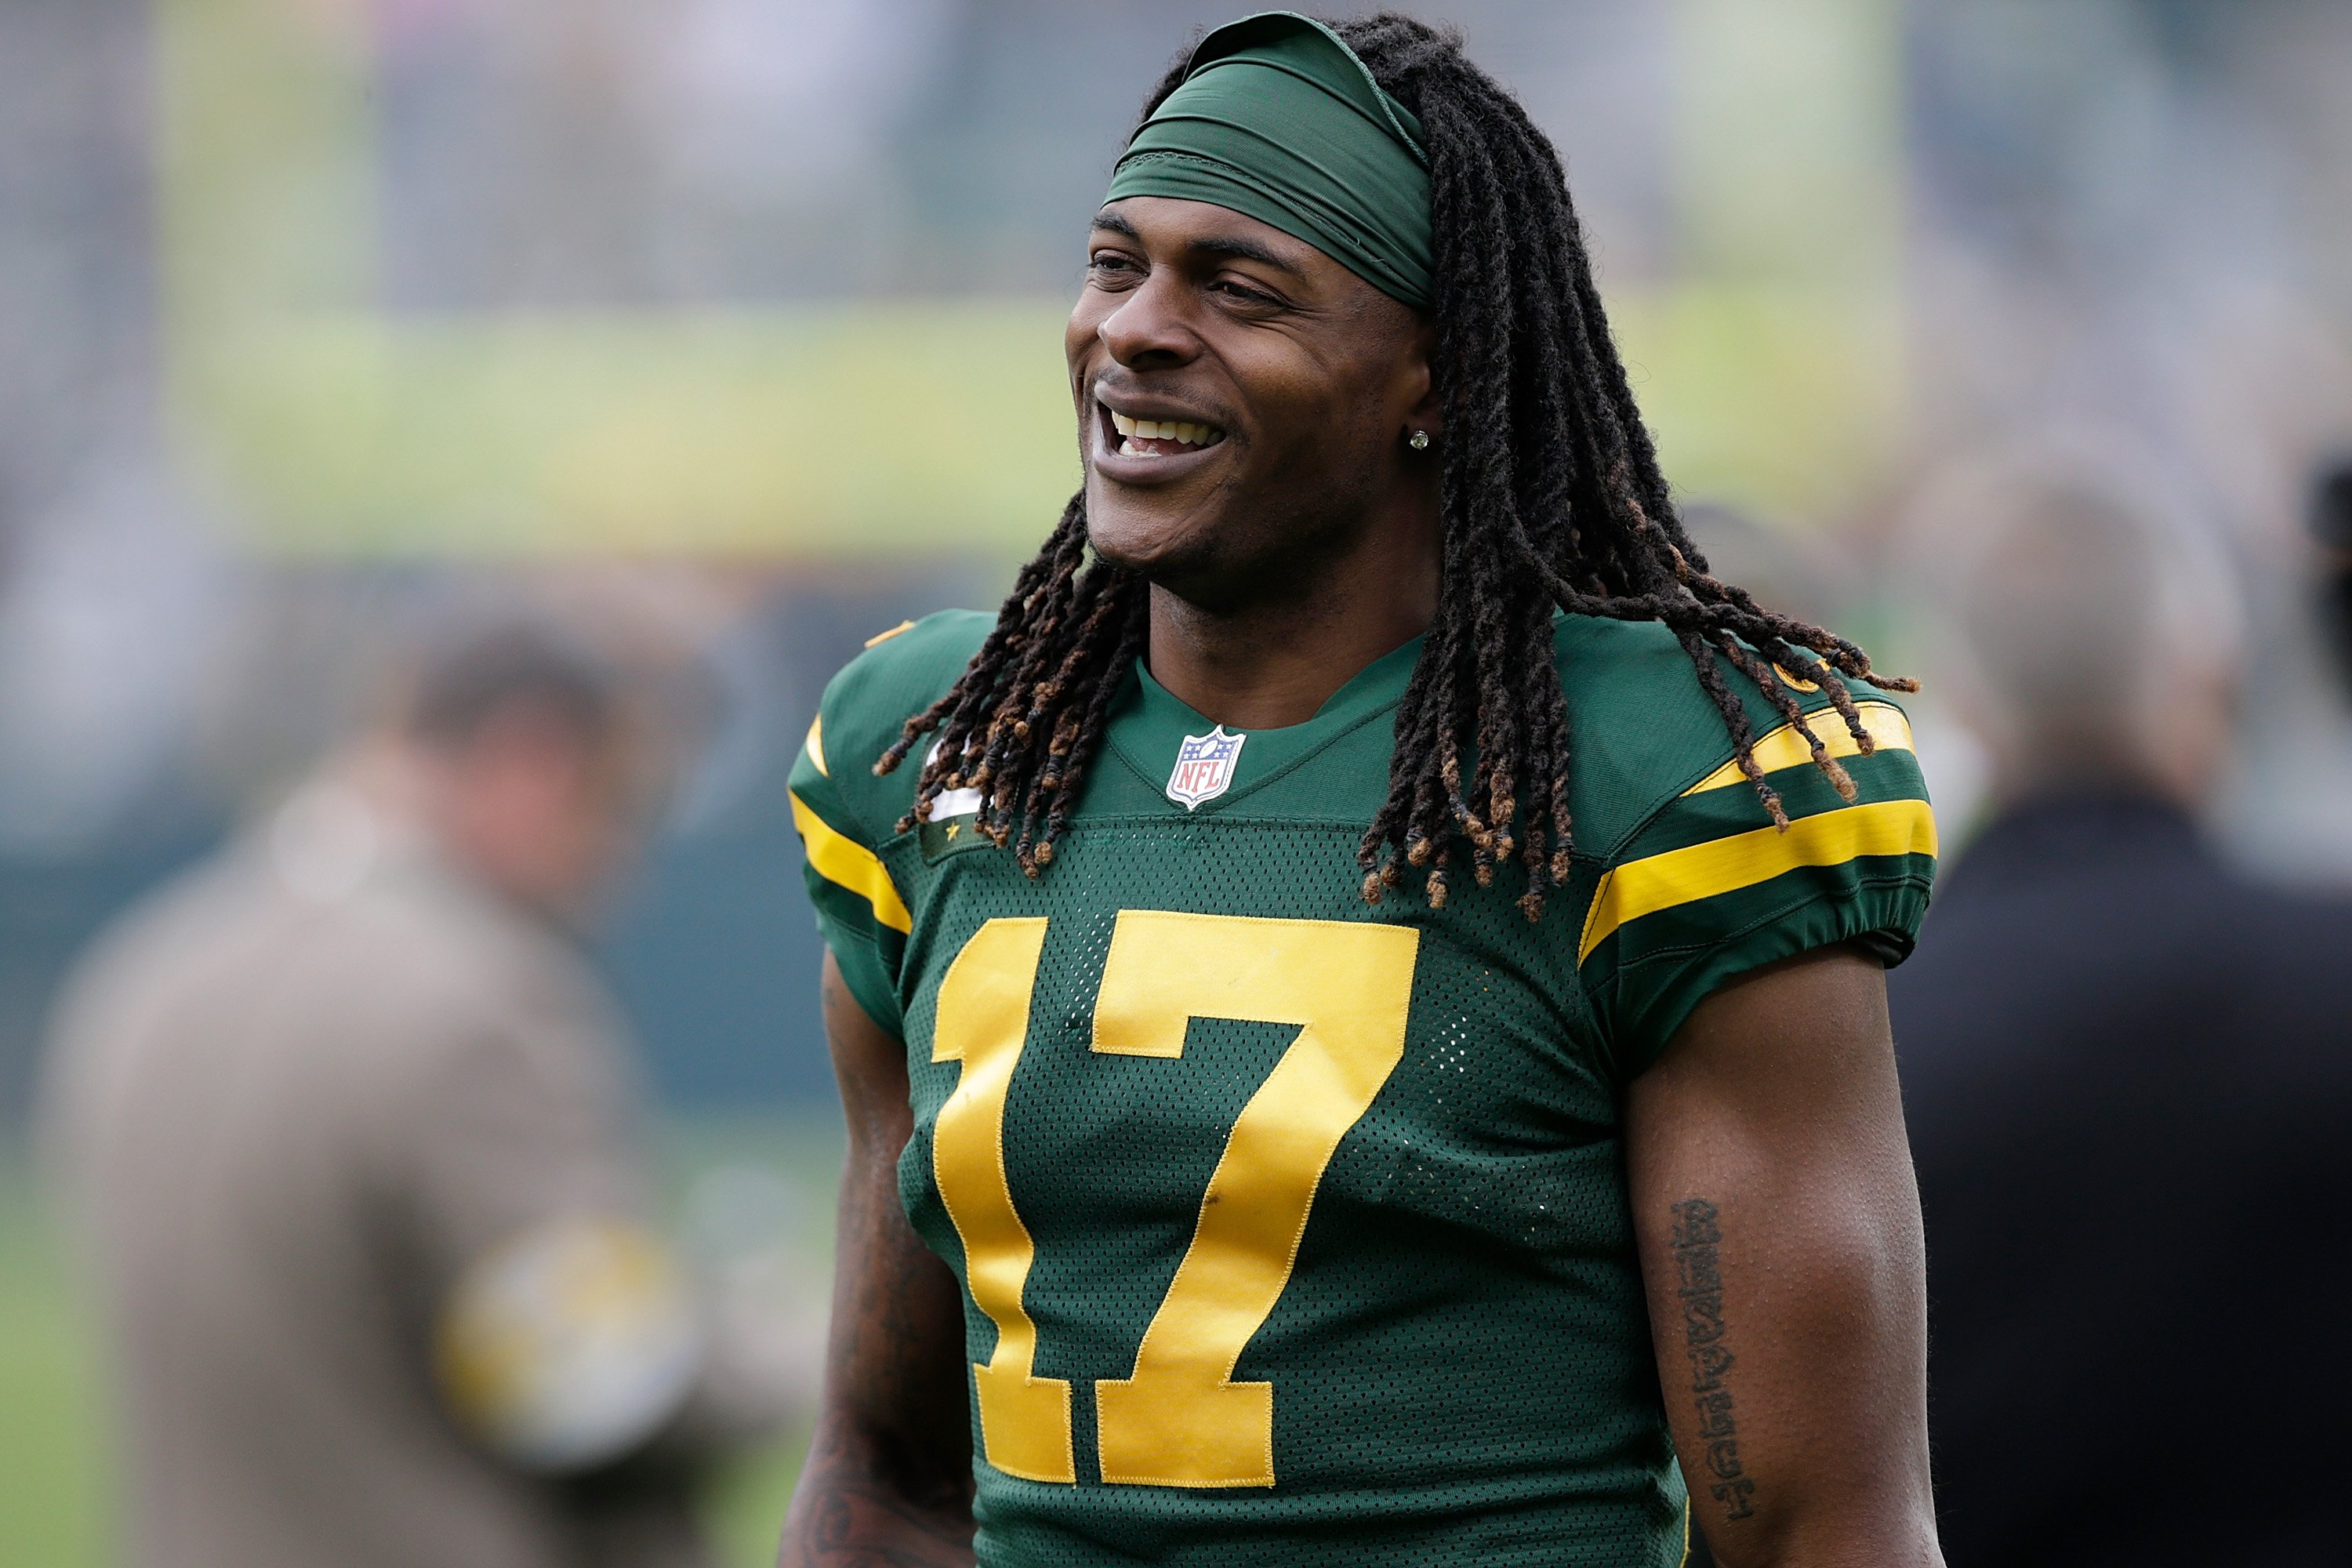 Davante Adams smiling after the game against the Washington Football Team